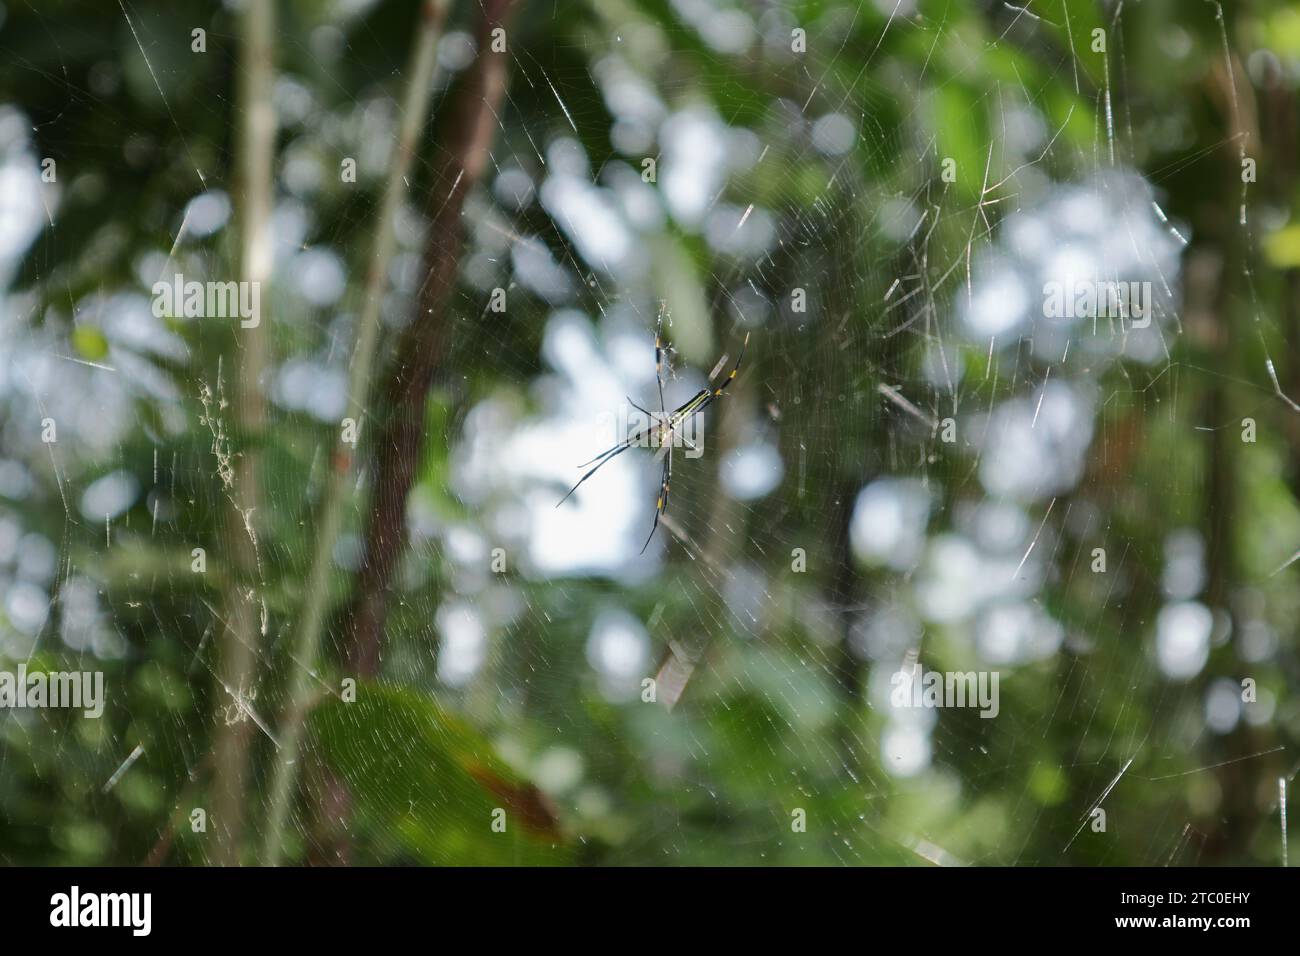 A young, female Giant golden orb weaver (Nephila Pilipes) is starting to walk on her spider web. View through the fuzzy spider net silk exposed to dir Stock Photo